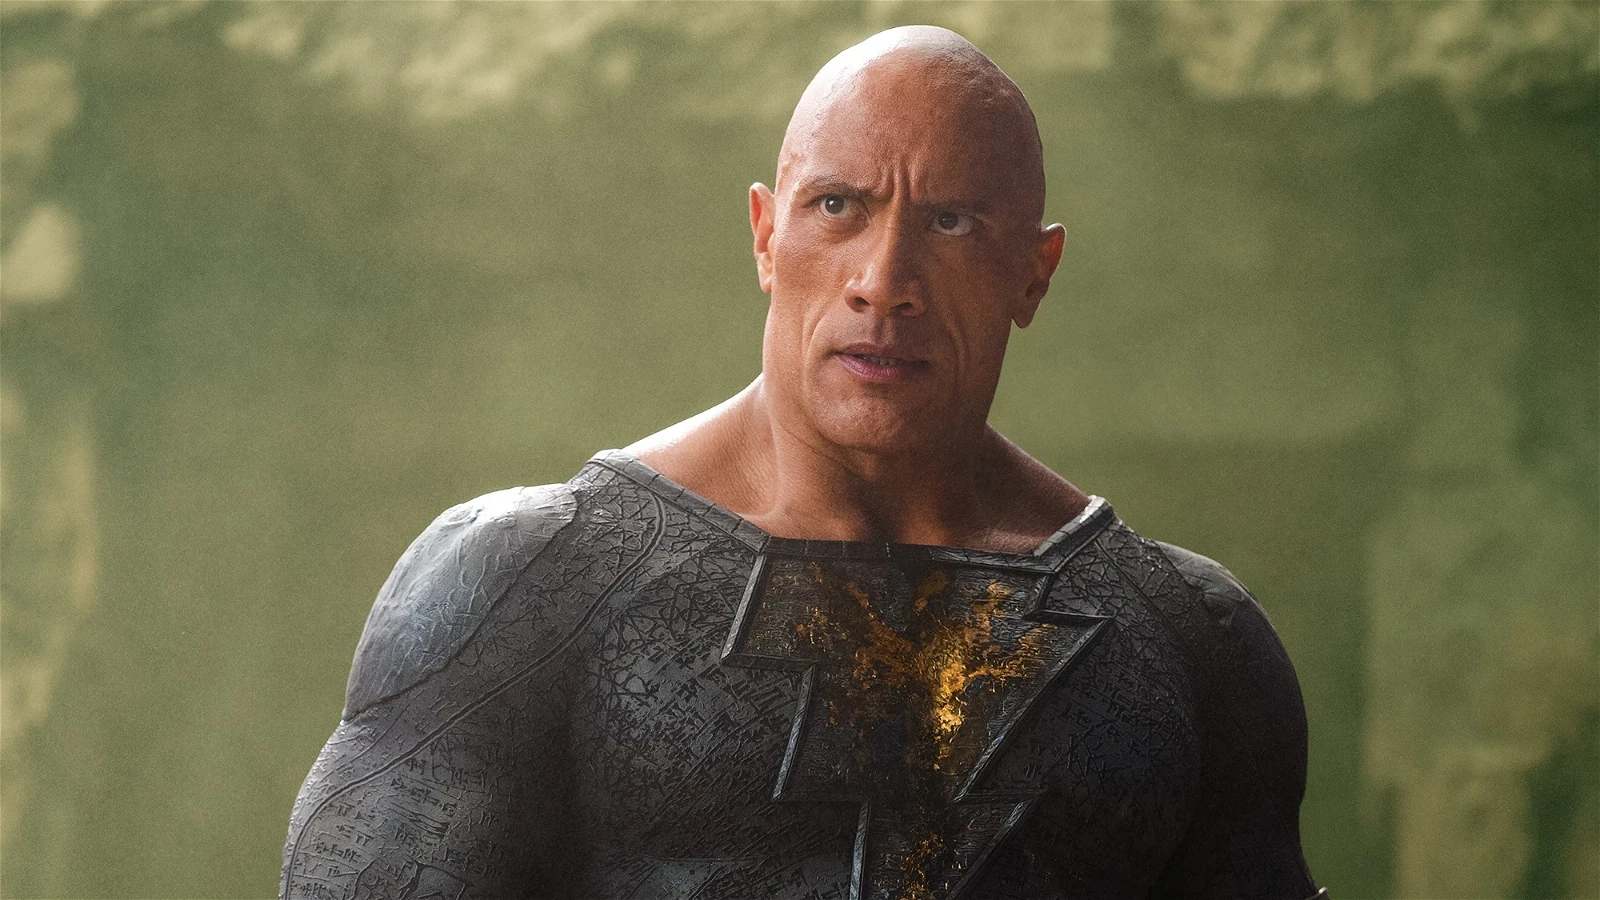 That's between me and a few of the loved ones”: Black Adam Star Dwayne Johnson Chokes up While Answering When He Felt the Most Abandoned - FandomWire